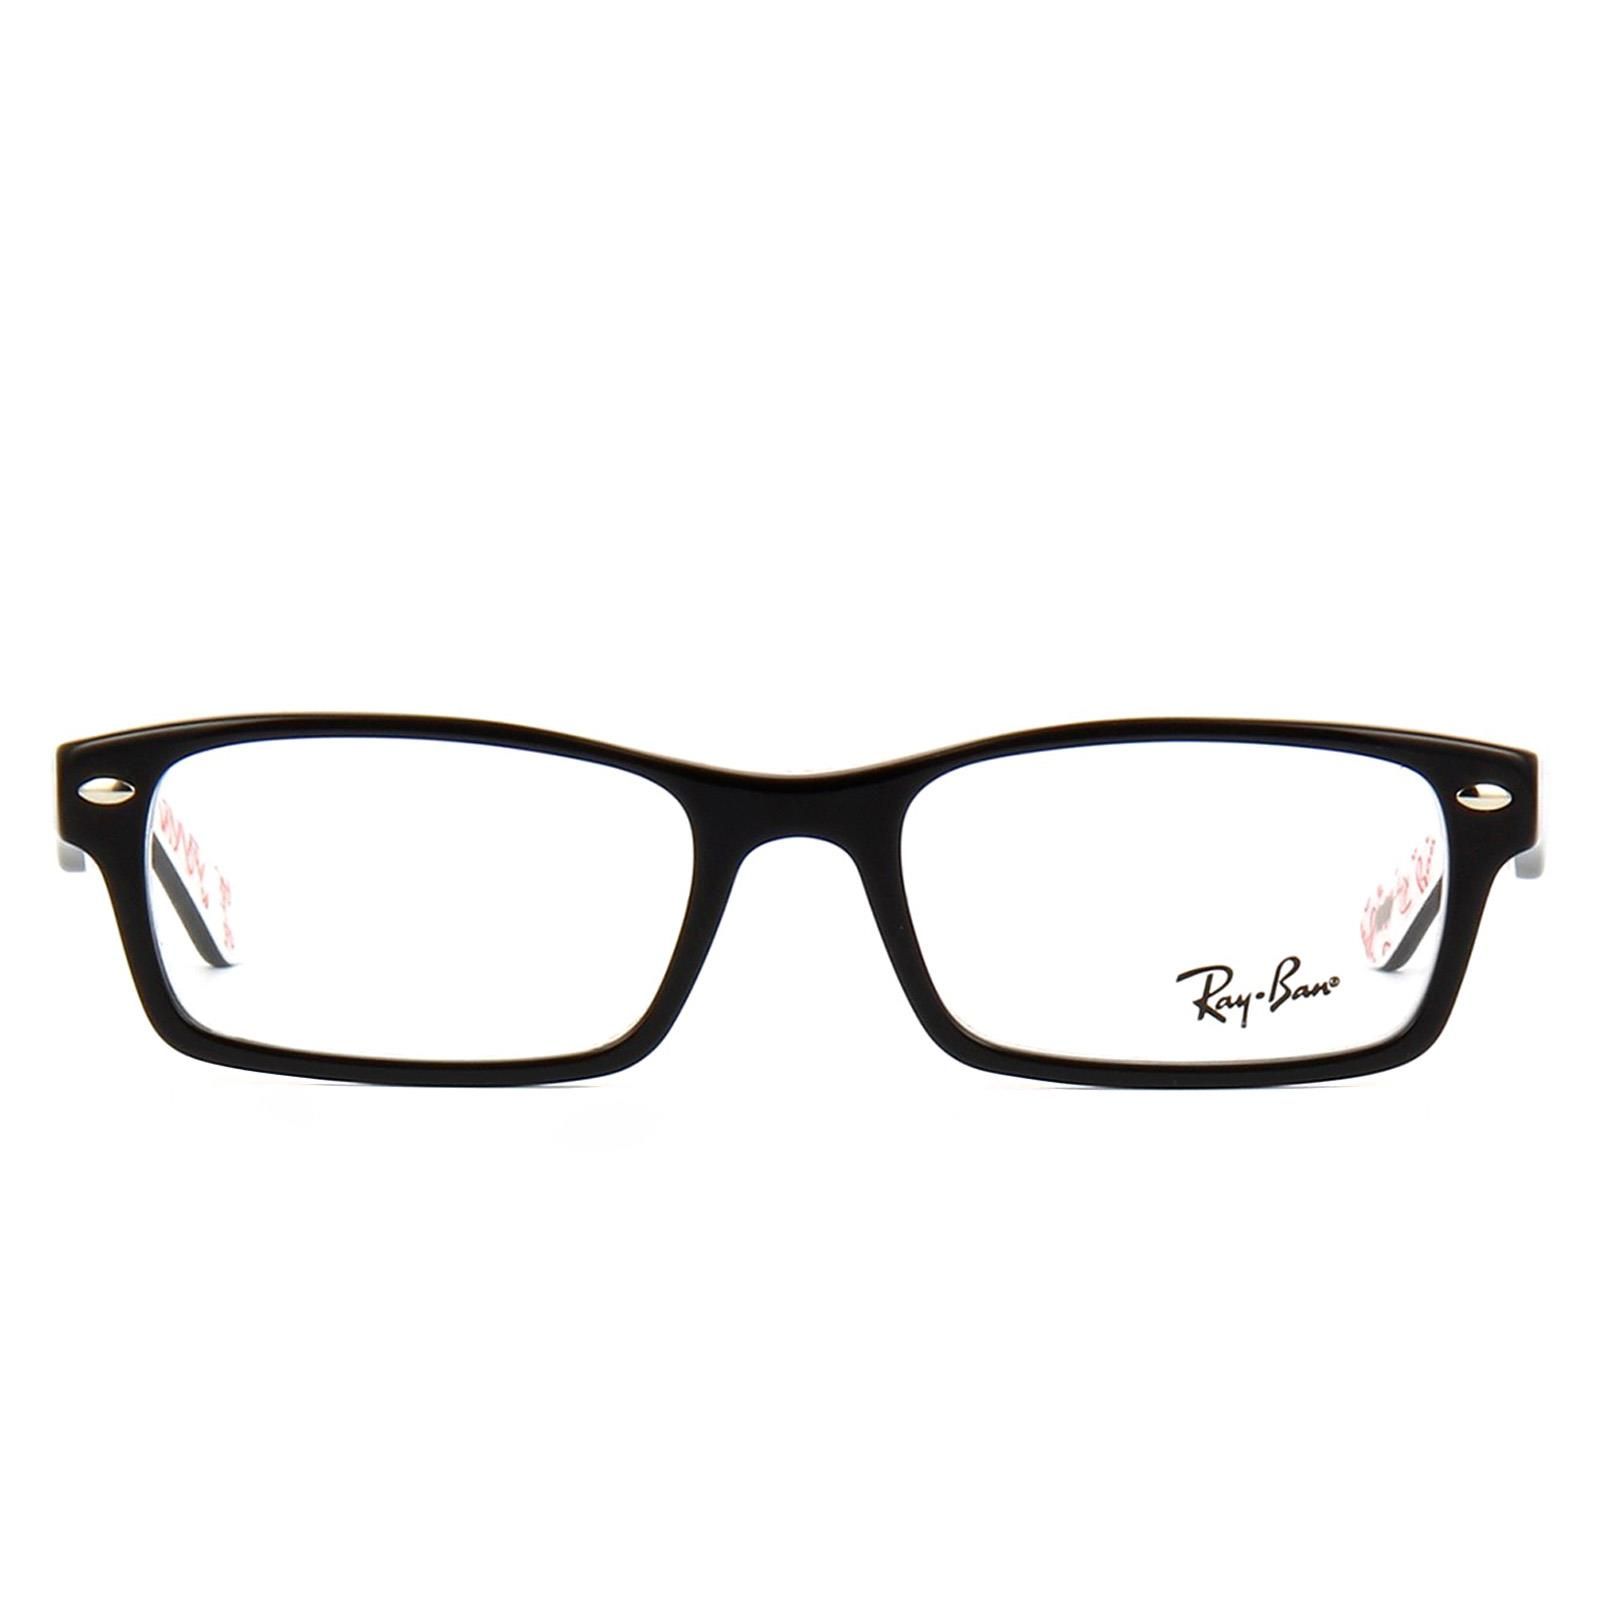 Ray-Ban Glasses Frames 5206 5014 Black on White Texture 52mm are a classic simple shape with typical Ray-Ban styling and feature various different insides to the frame depending on the colour choice that give them a unique and stylish twist.